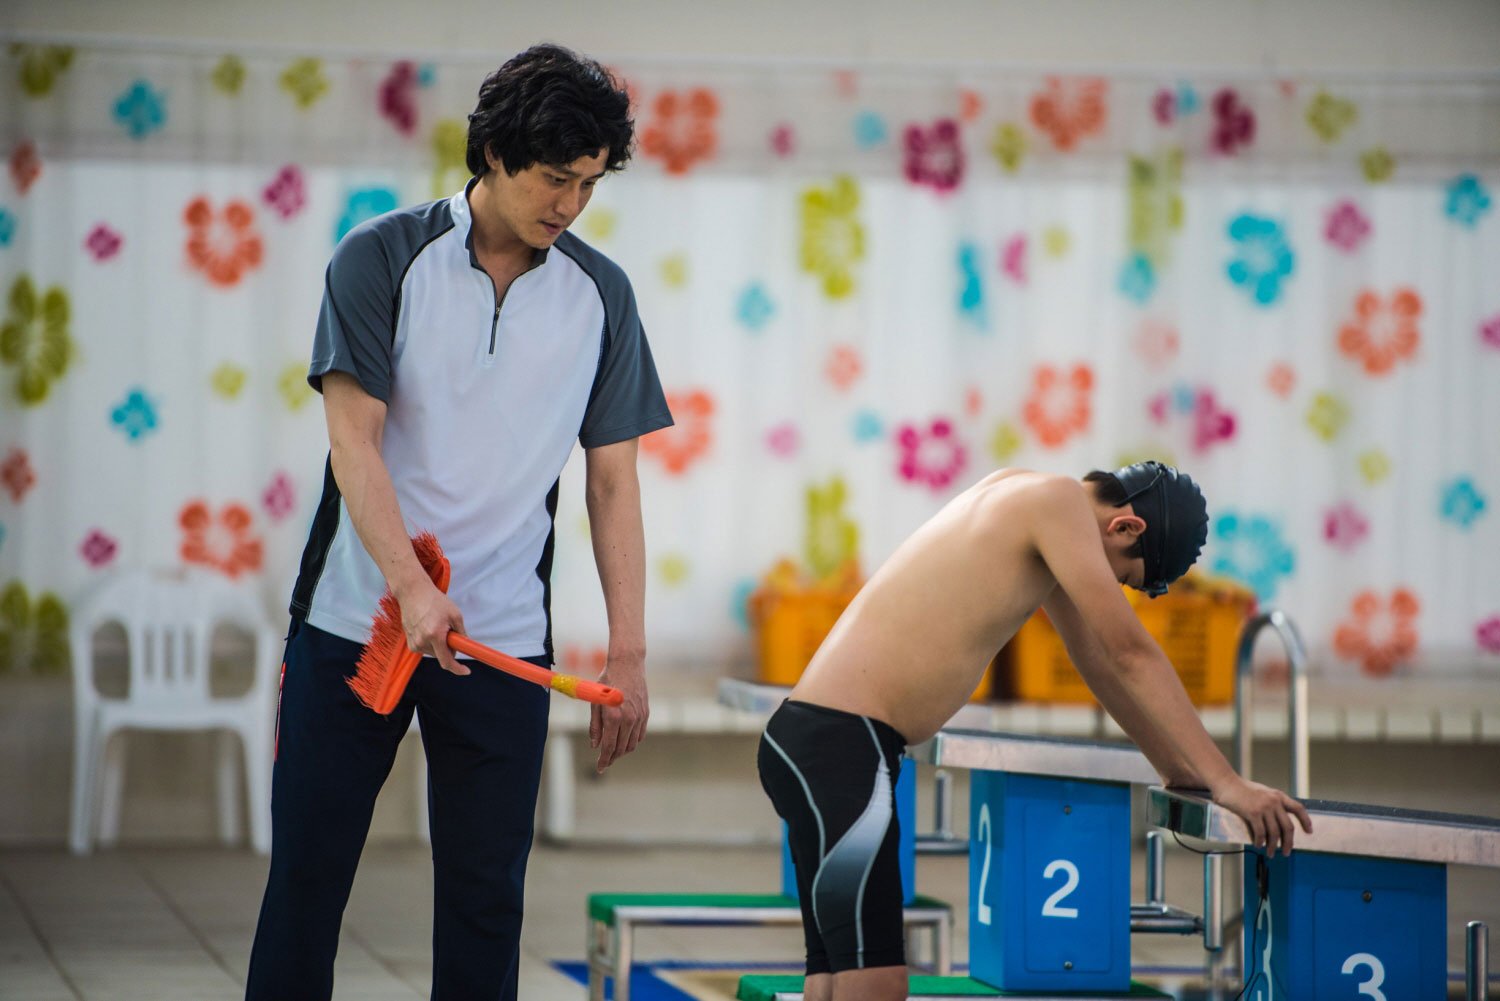 Scene from the film Fourth Place in which a swimming coach is hitting a boy with a broom.